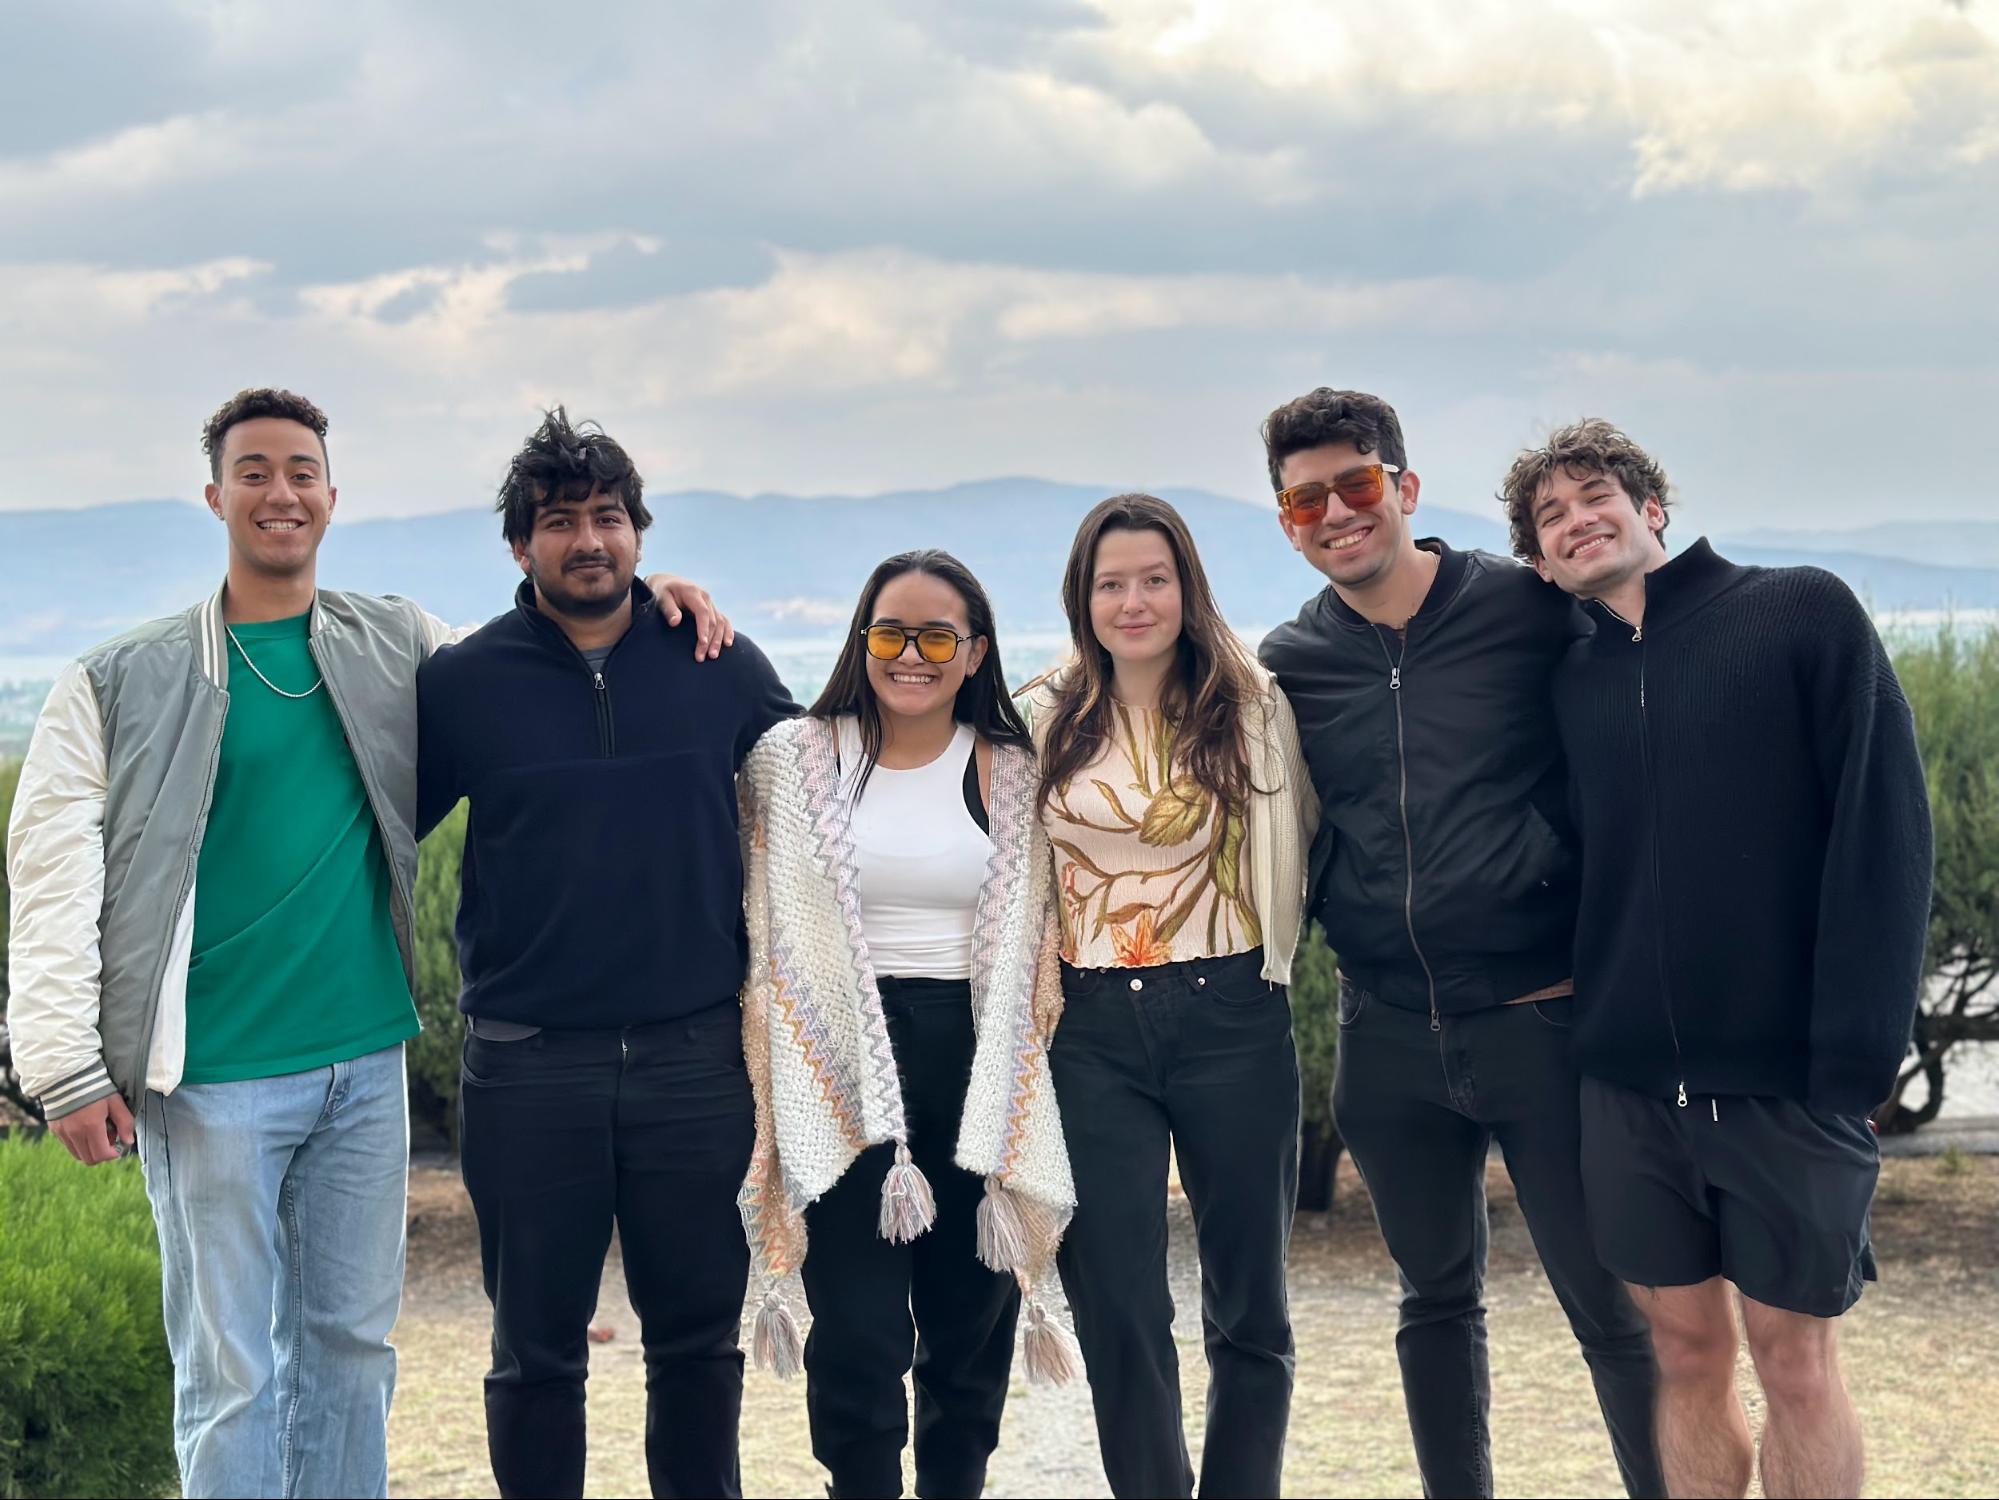 Six friends pose for a picture in front of a landscape of mountains and a cloudy sky